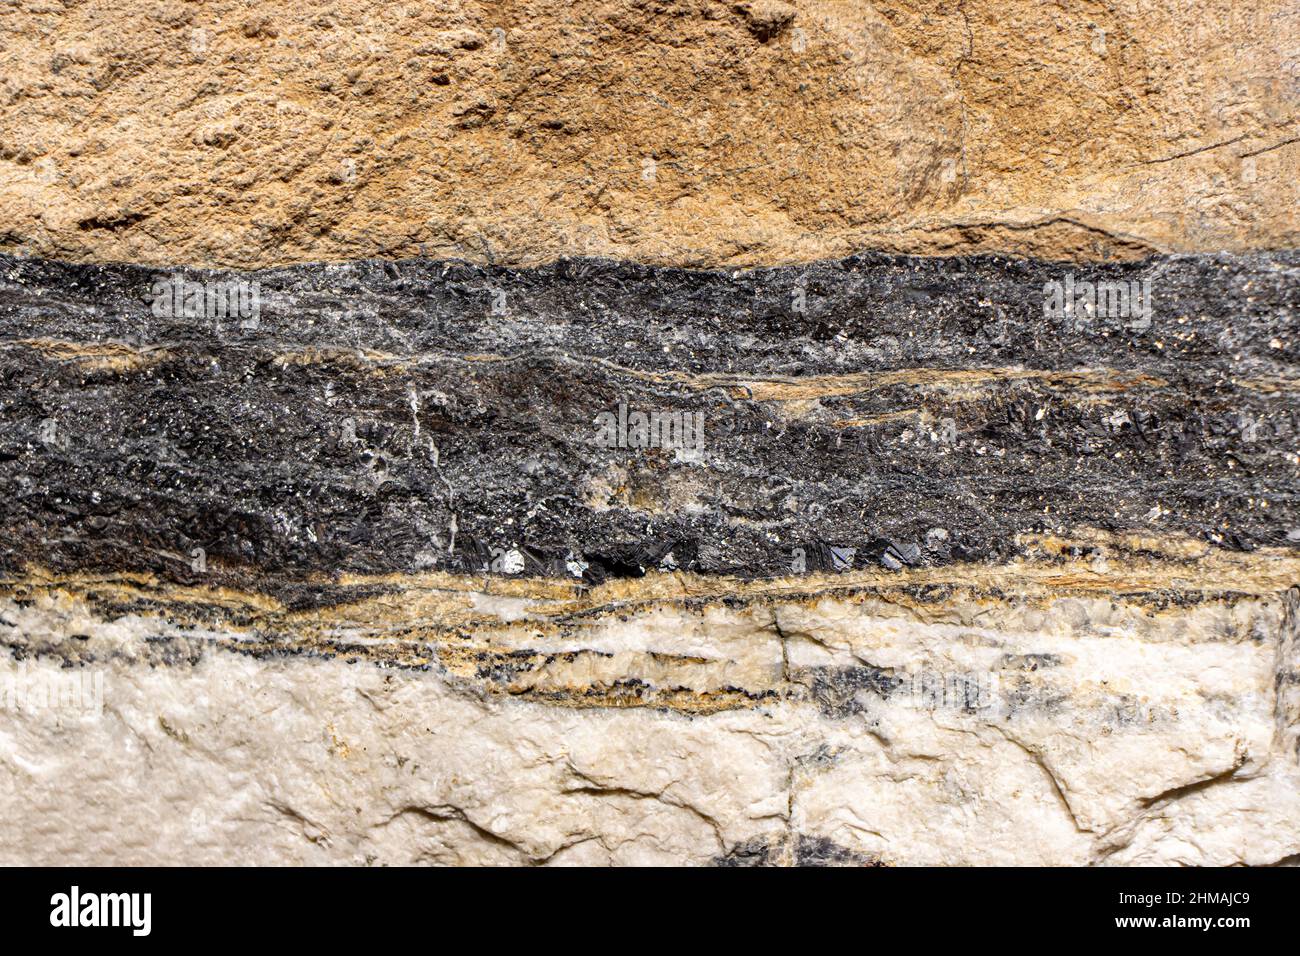 Galenite mineral in geological layers, cross section of rock. Stock Photo